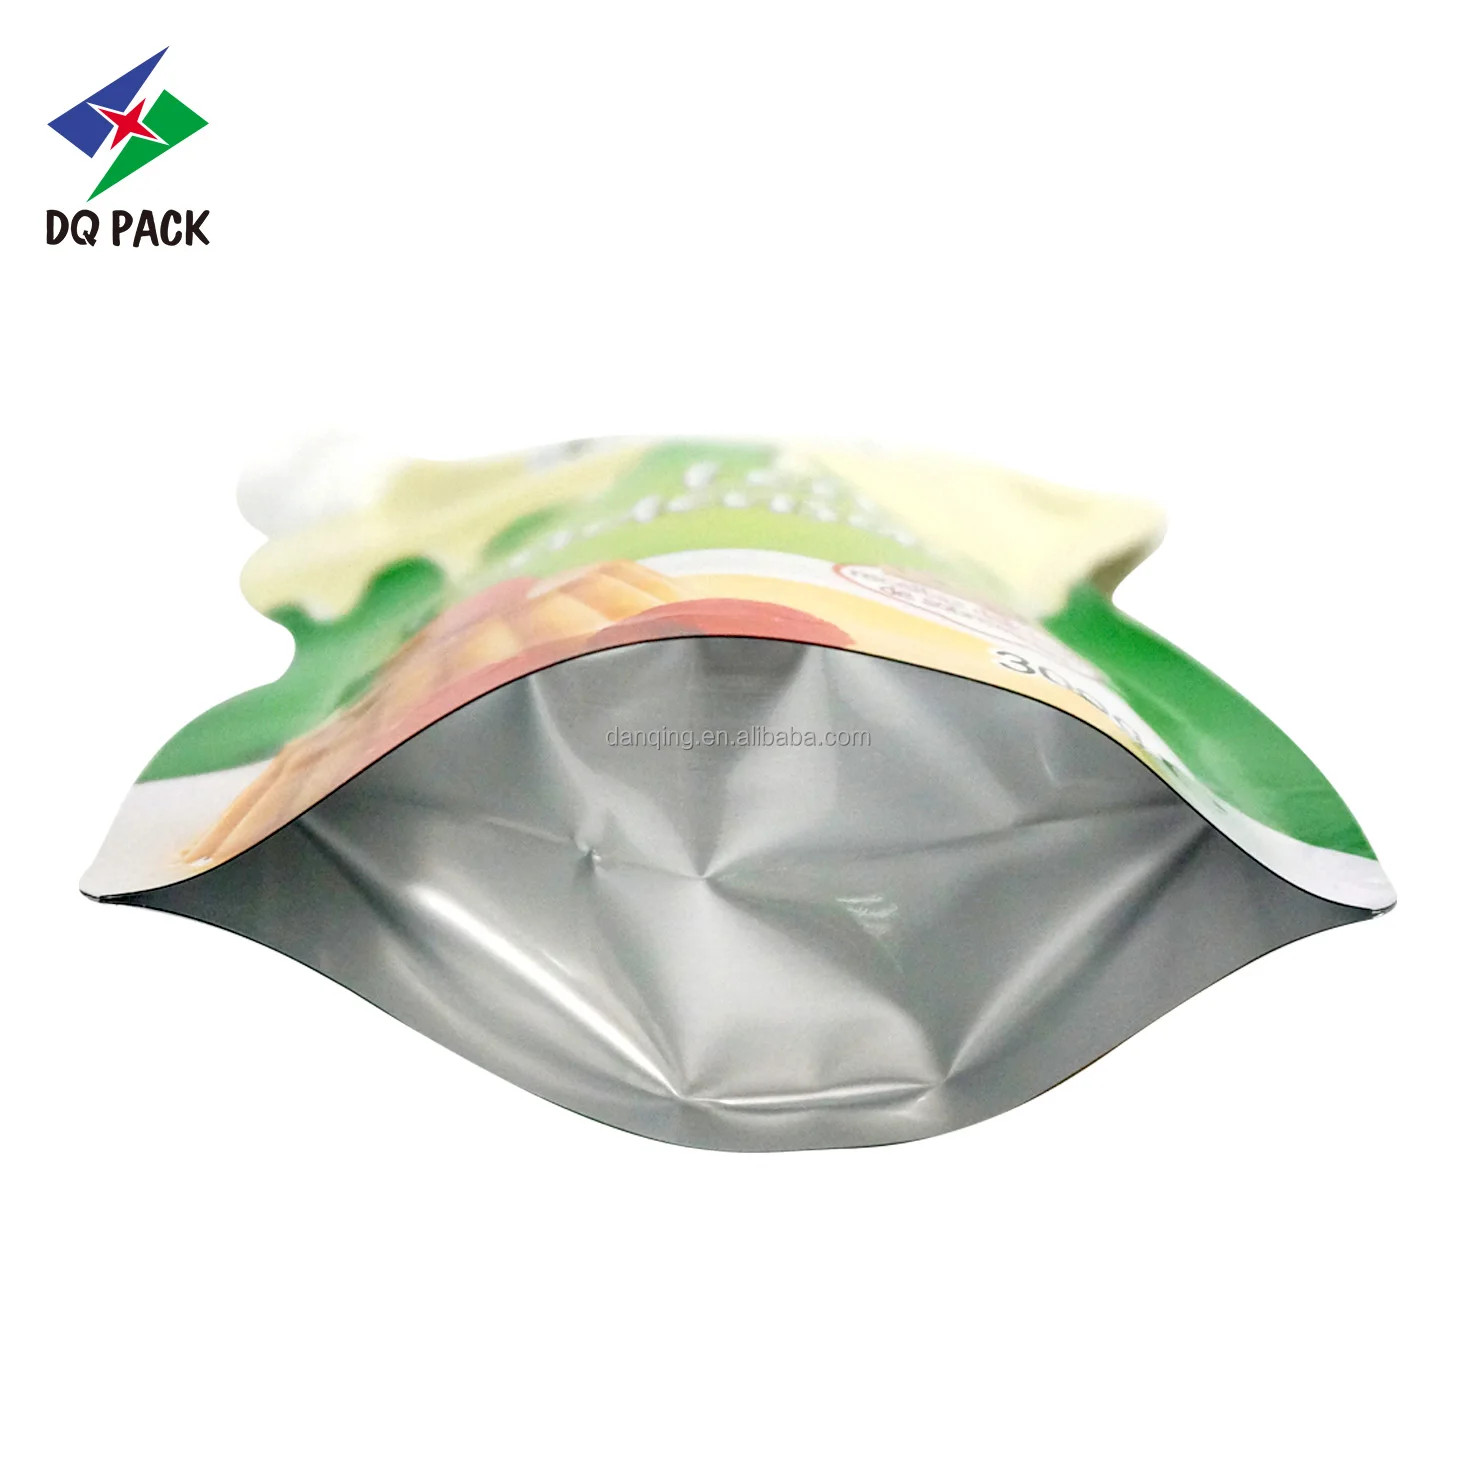 New Design Doypack Metalized stand up pouch with corner spout for 300g Condensed Milk Packaging